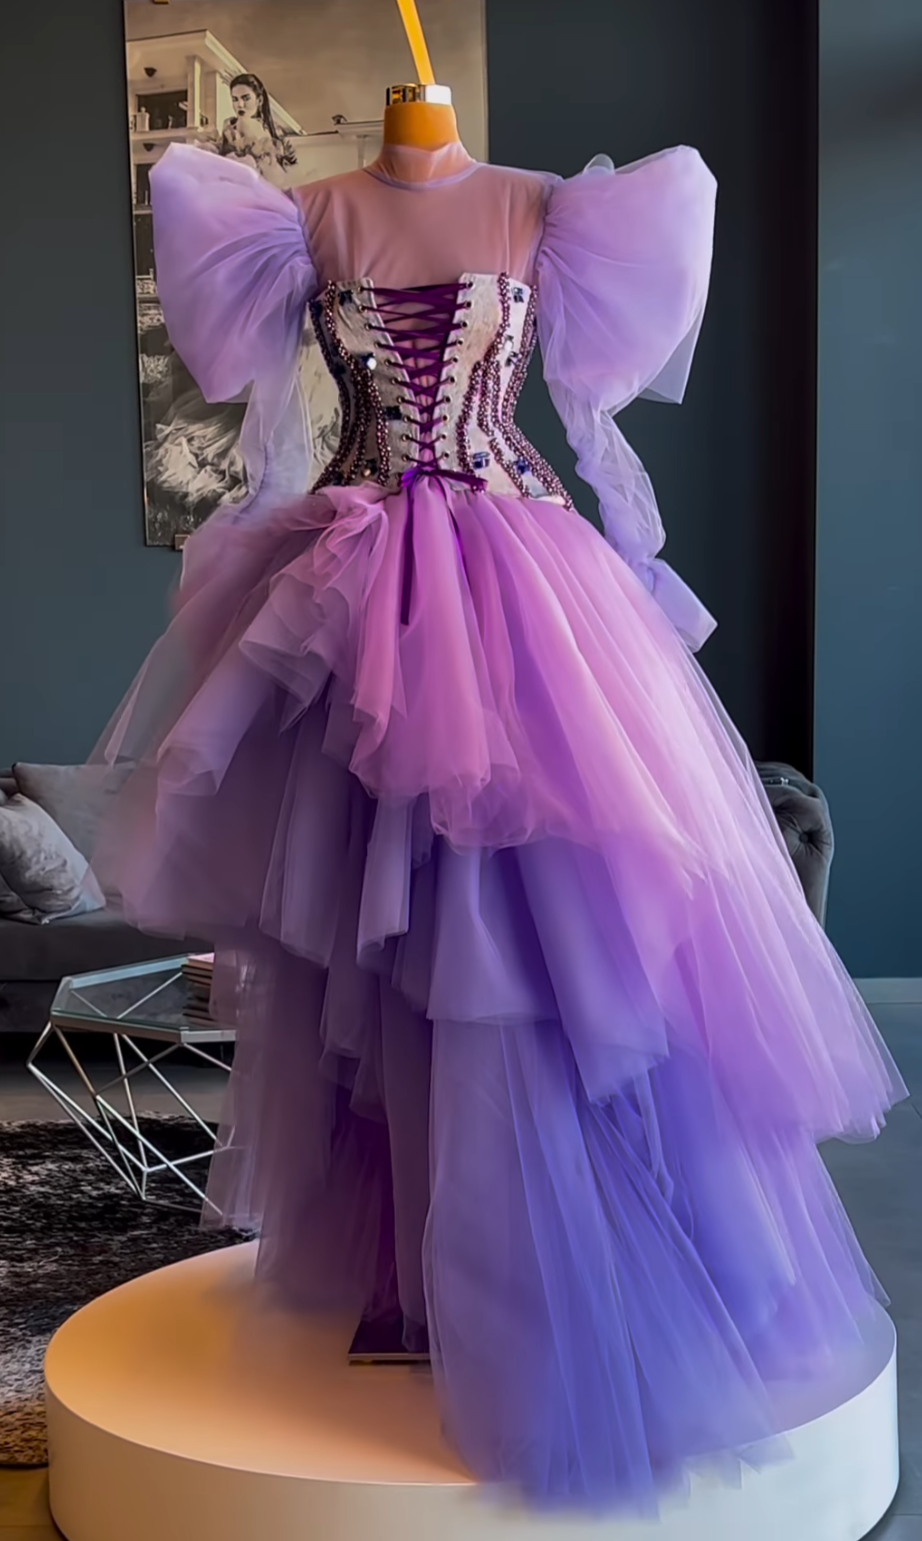 Denim Embellished Corset on Purple Tulle Gown